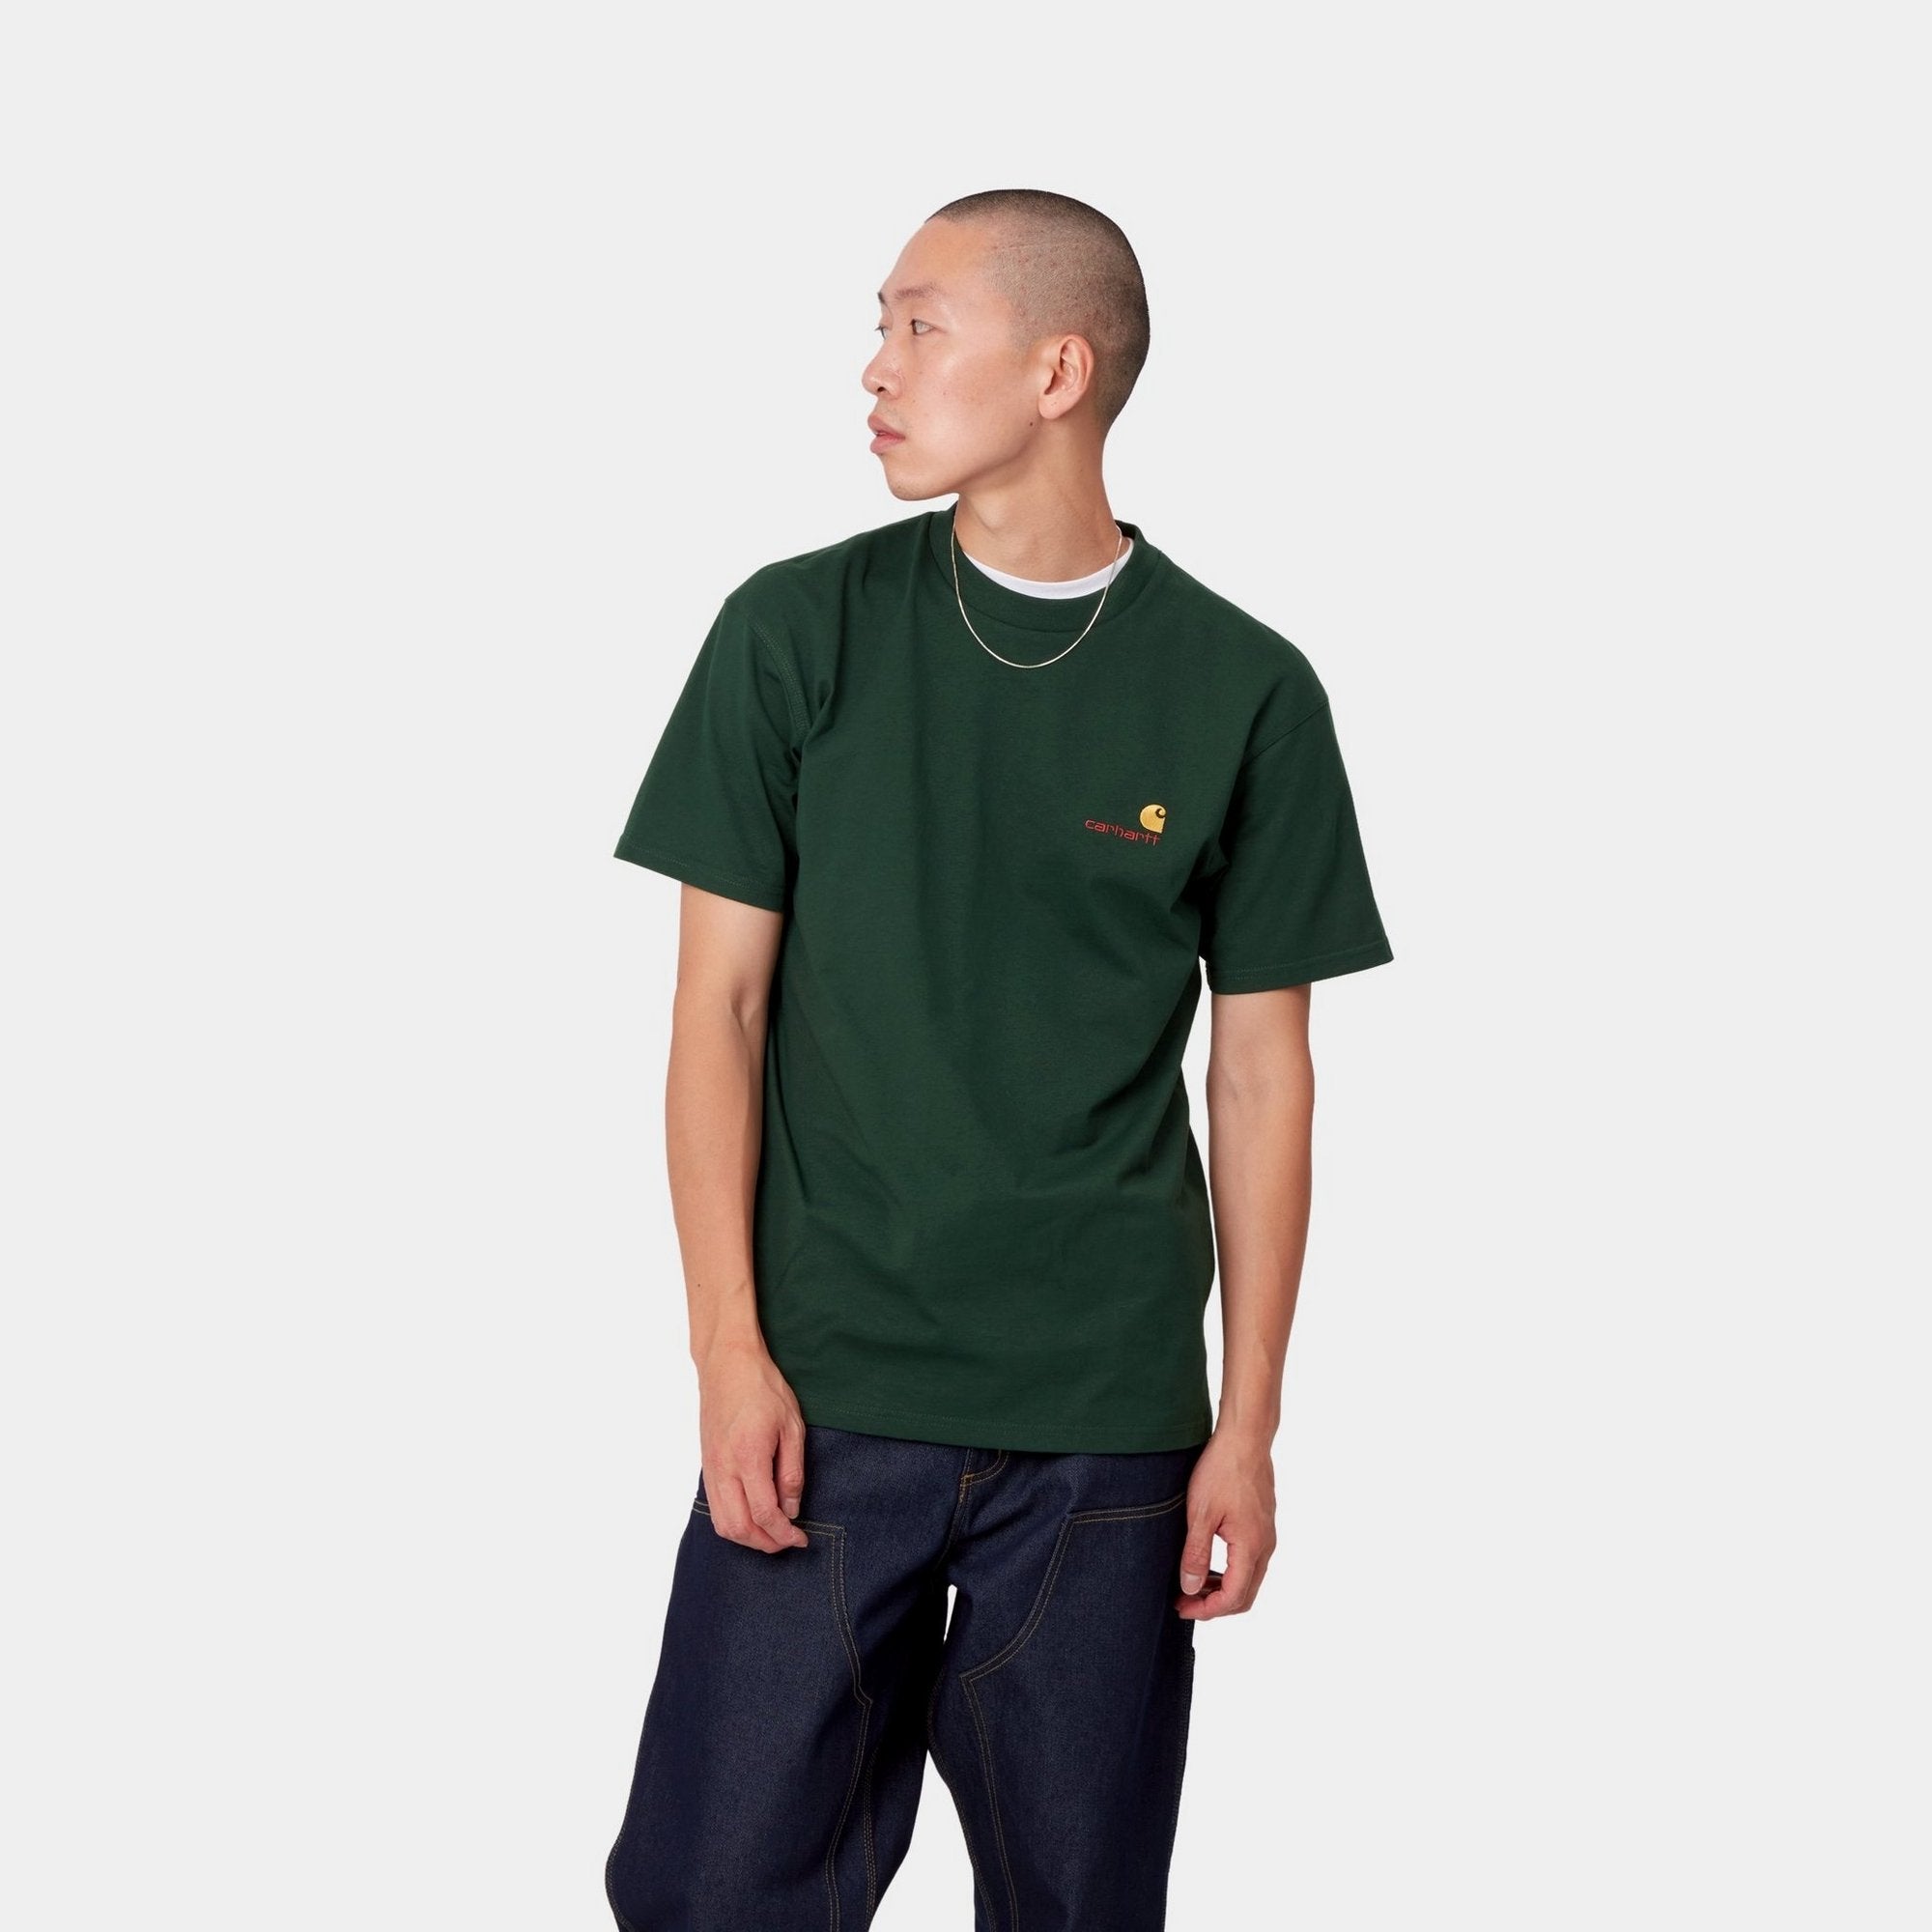 S/S American Script T-shirt GROVE
The S/S American Script T-Shirt is constructed from organic cotton jersey. Features our two-tone American Script logo embroidered on the chest. Loose fit.

100% Organic Cotton Single Jersey, 240 g/sqm
loose fit
american script embroidery
 CARHARTT WIP